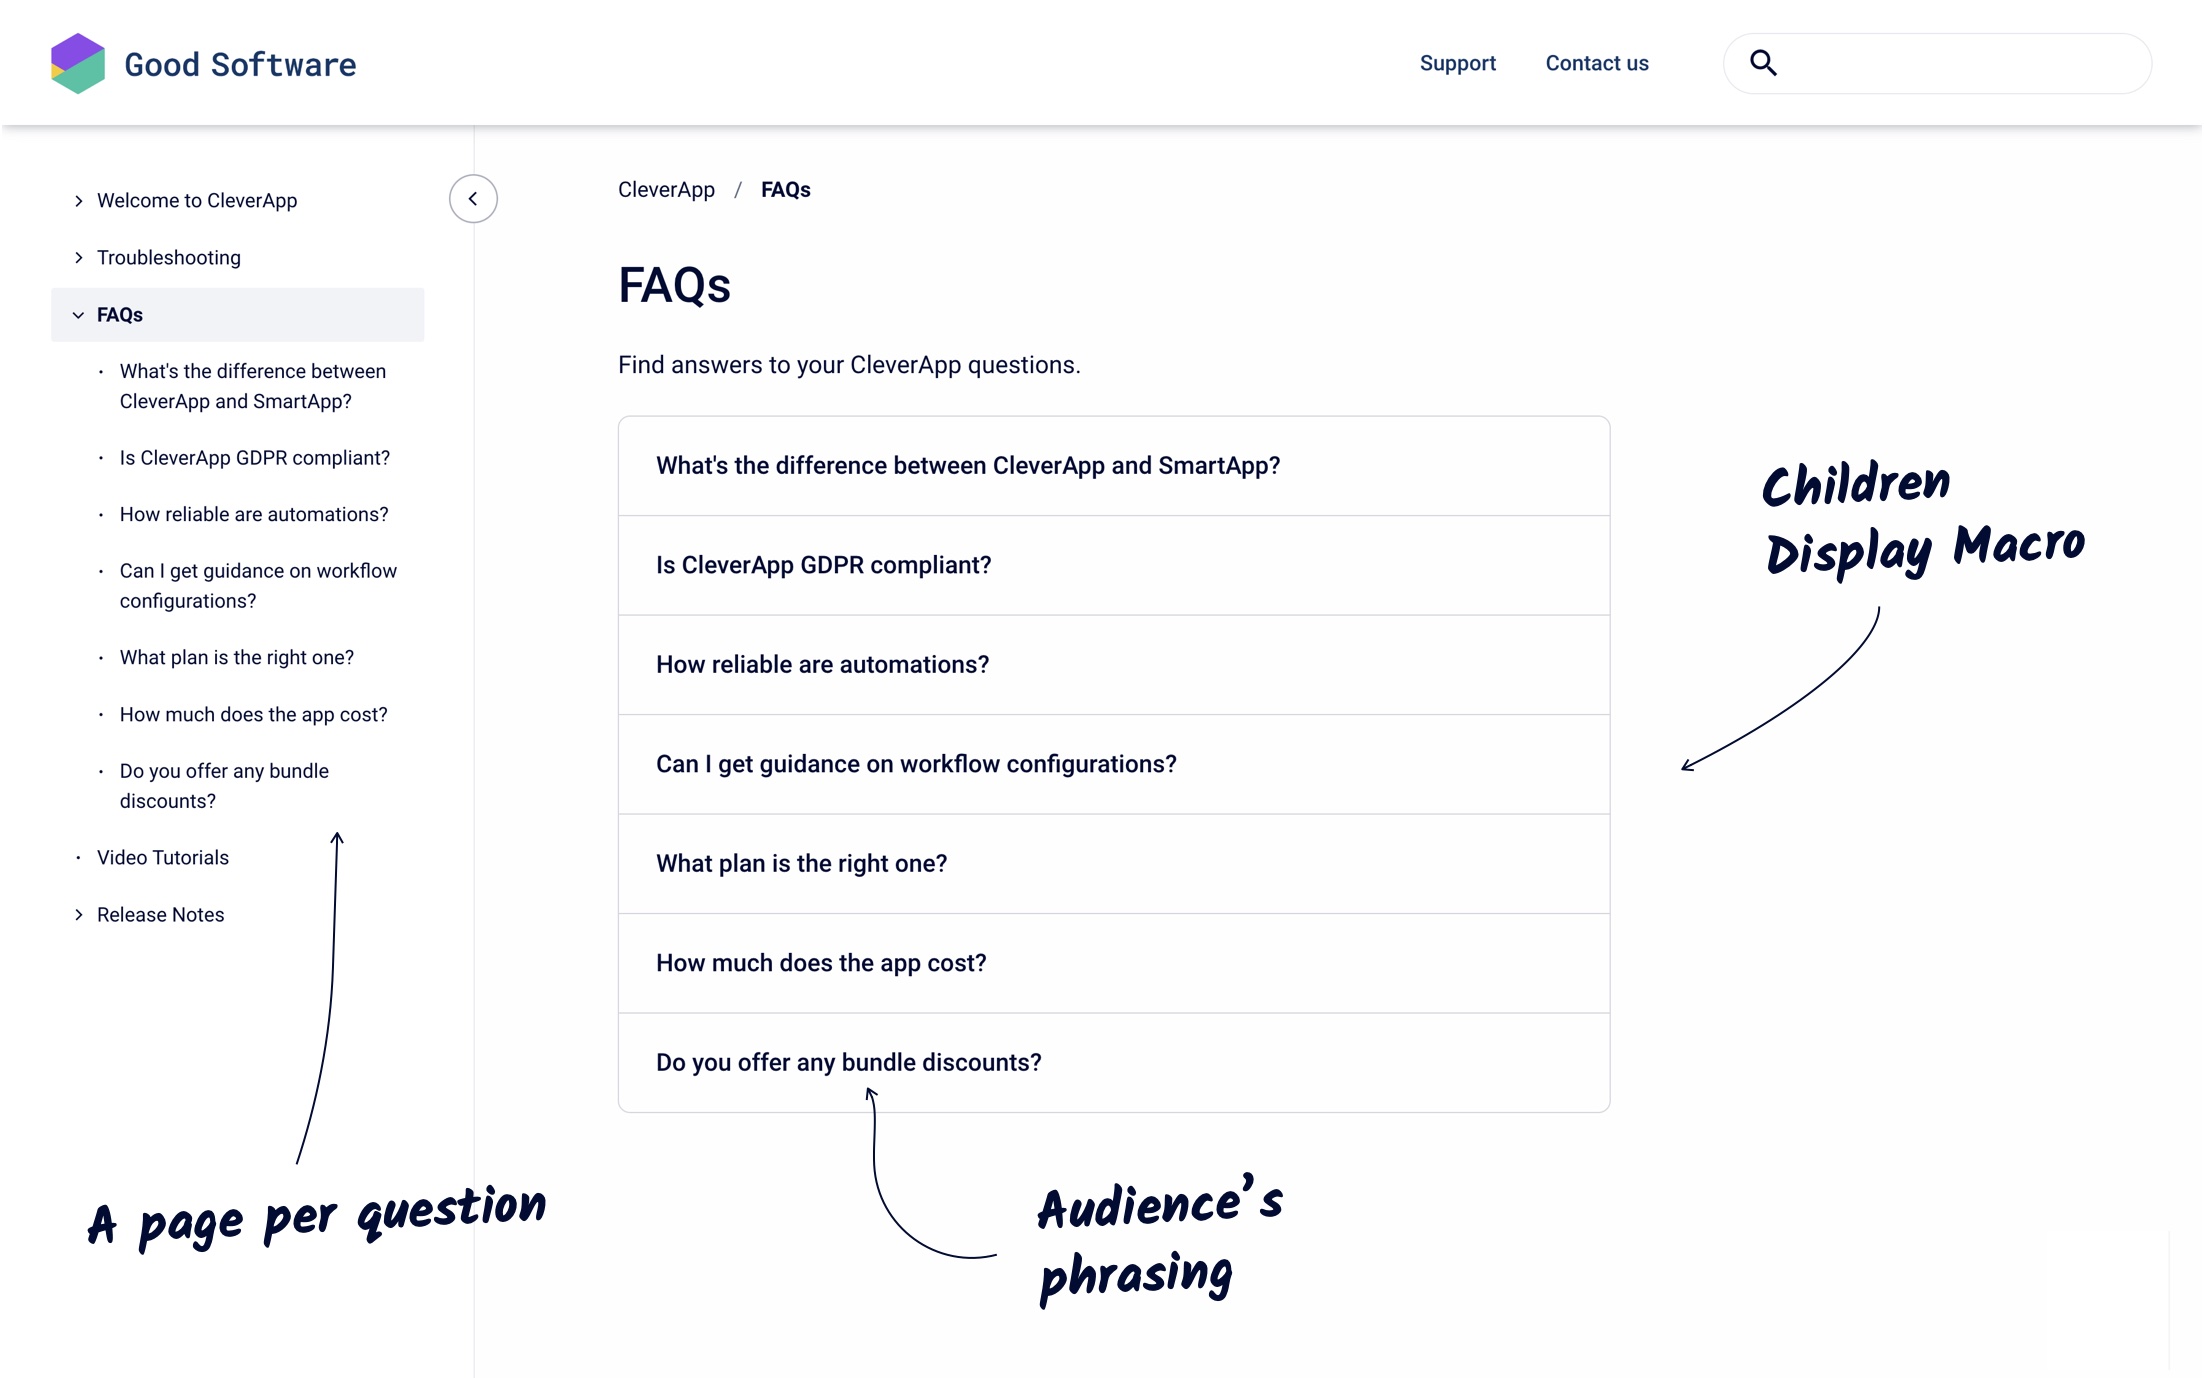 The structure of an FAQ page